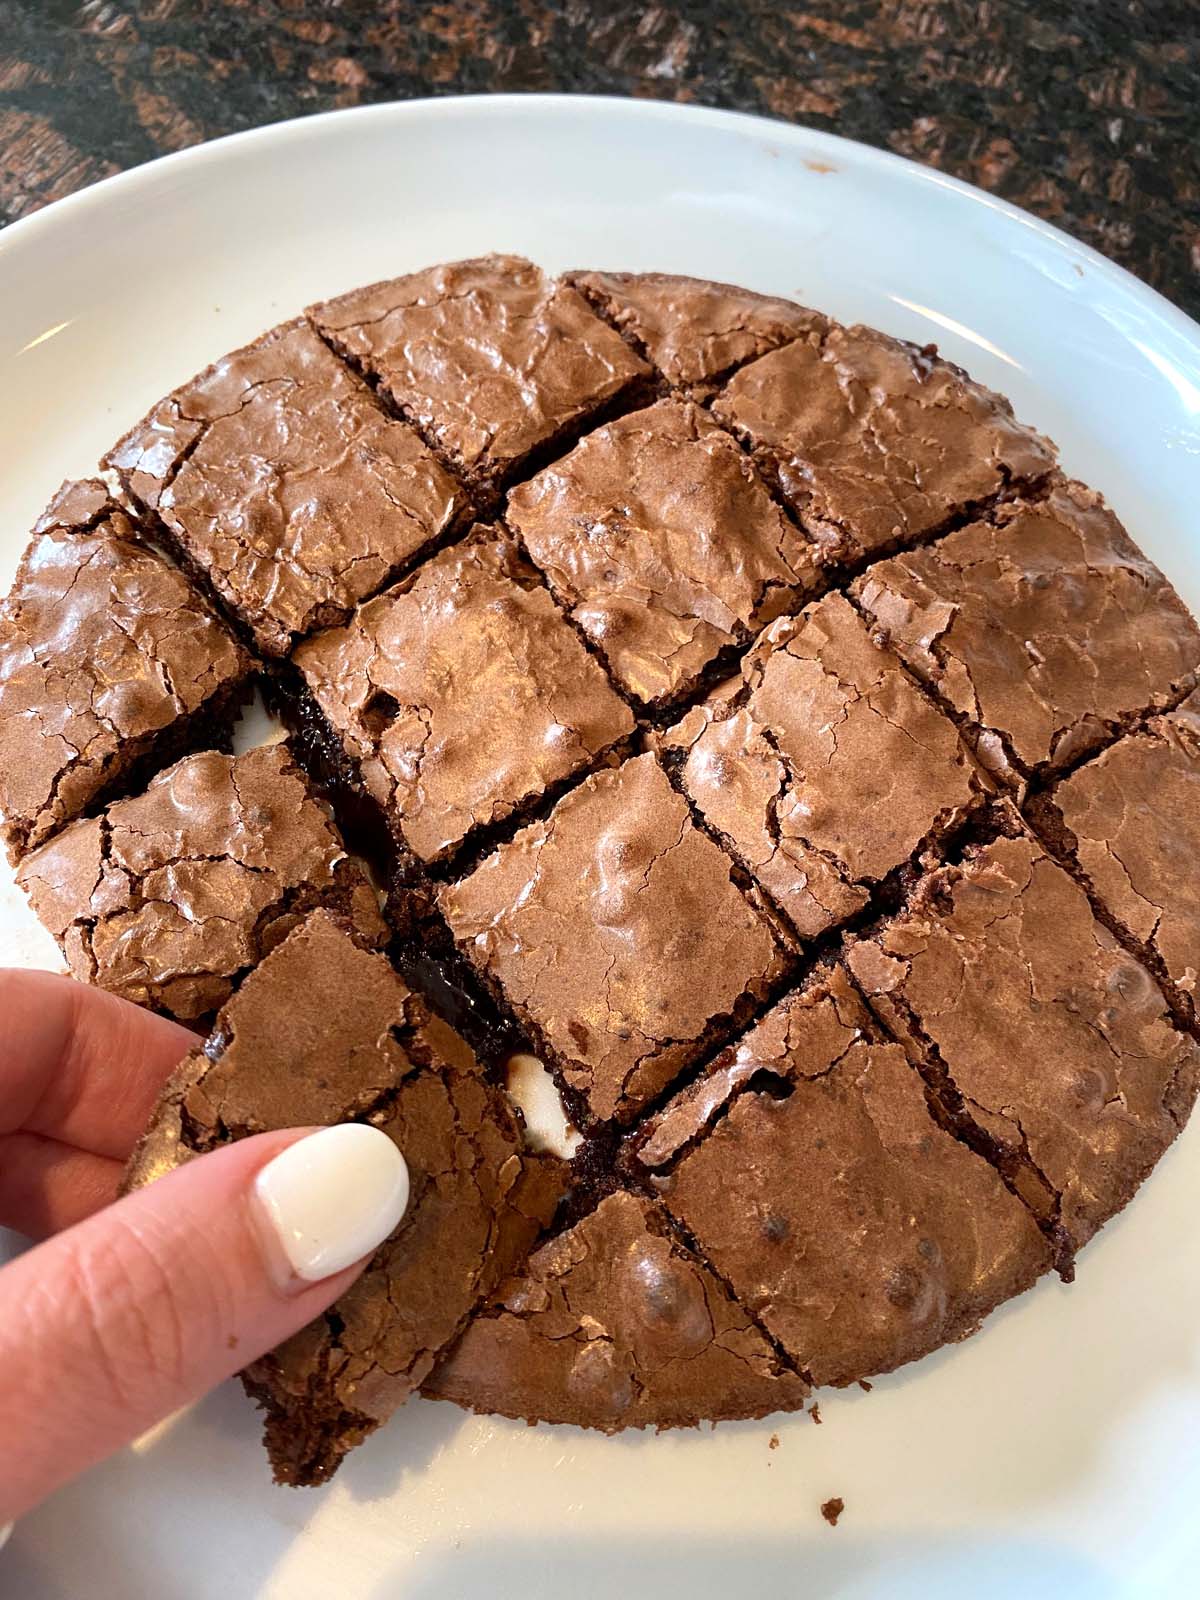 Hand picking up a piece of brownie from plate.